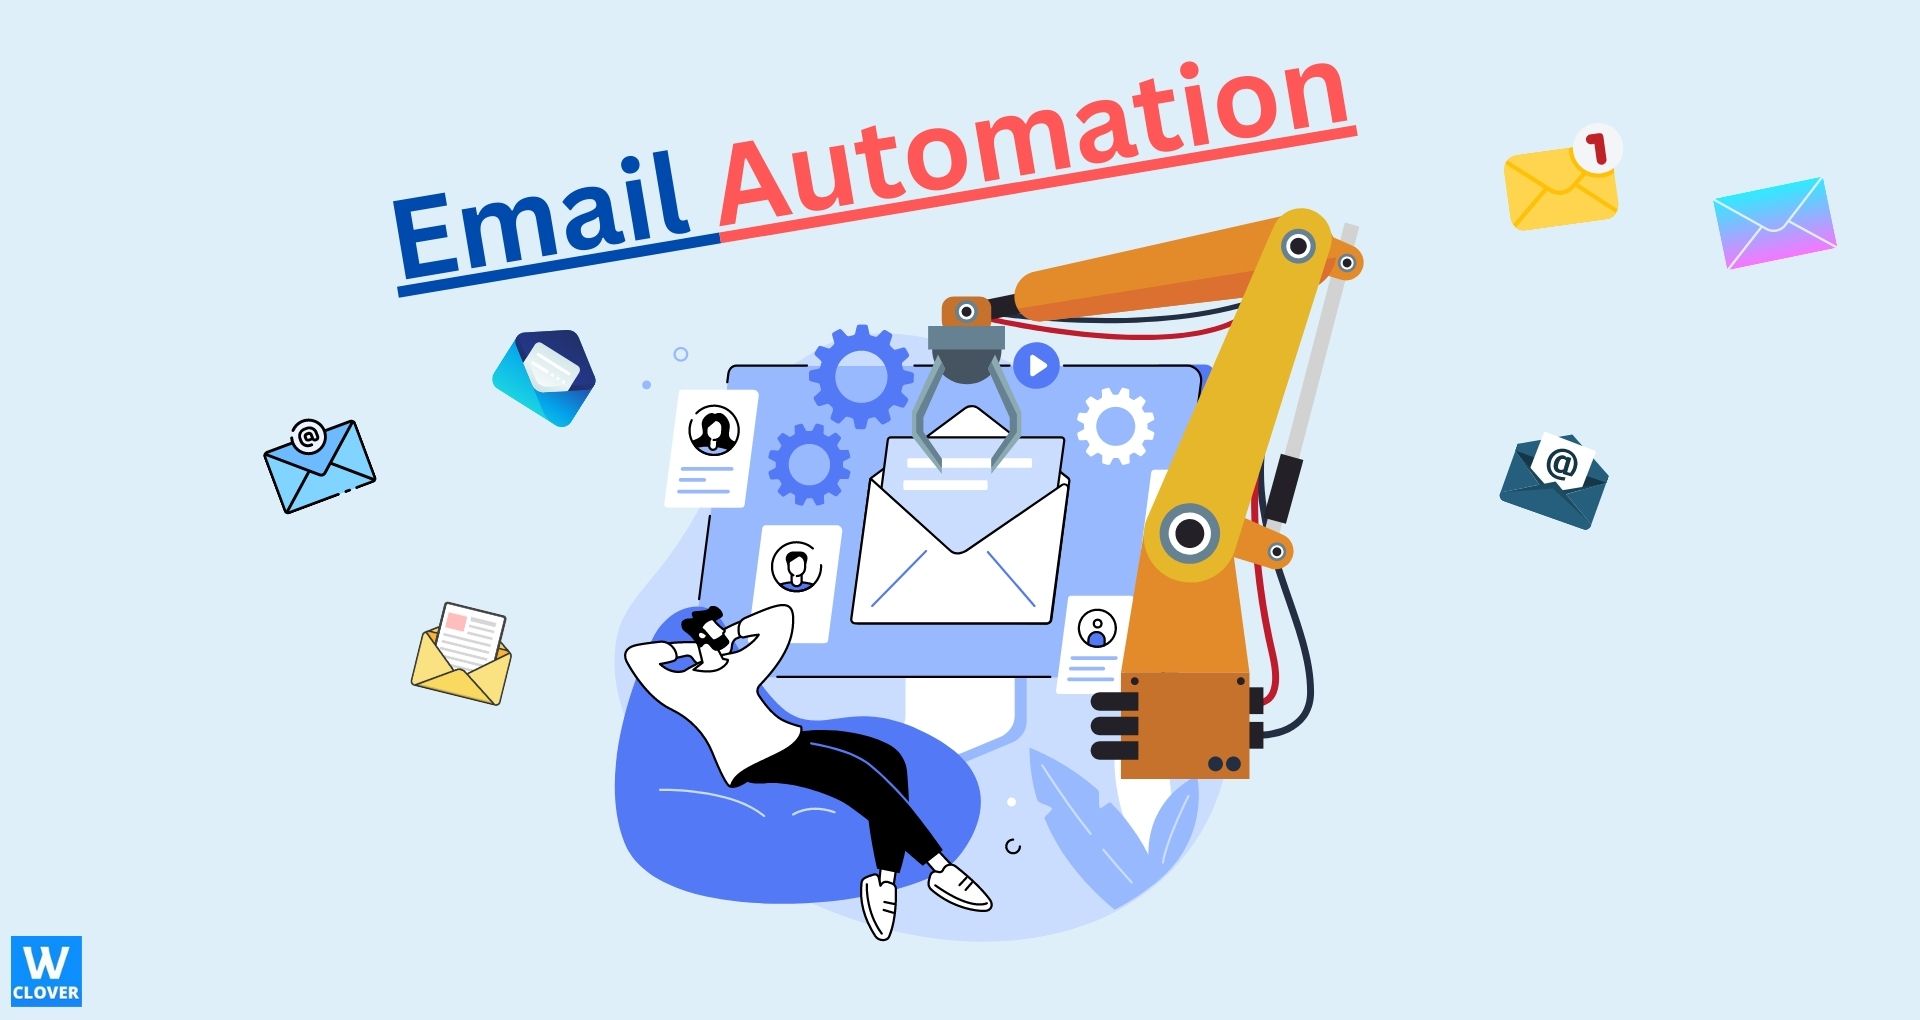 email automation graphics, man on sopha emais being automated